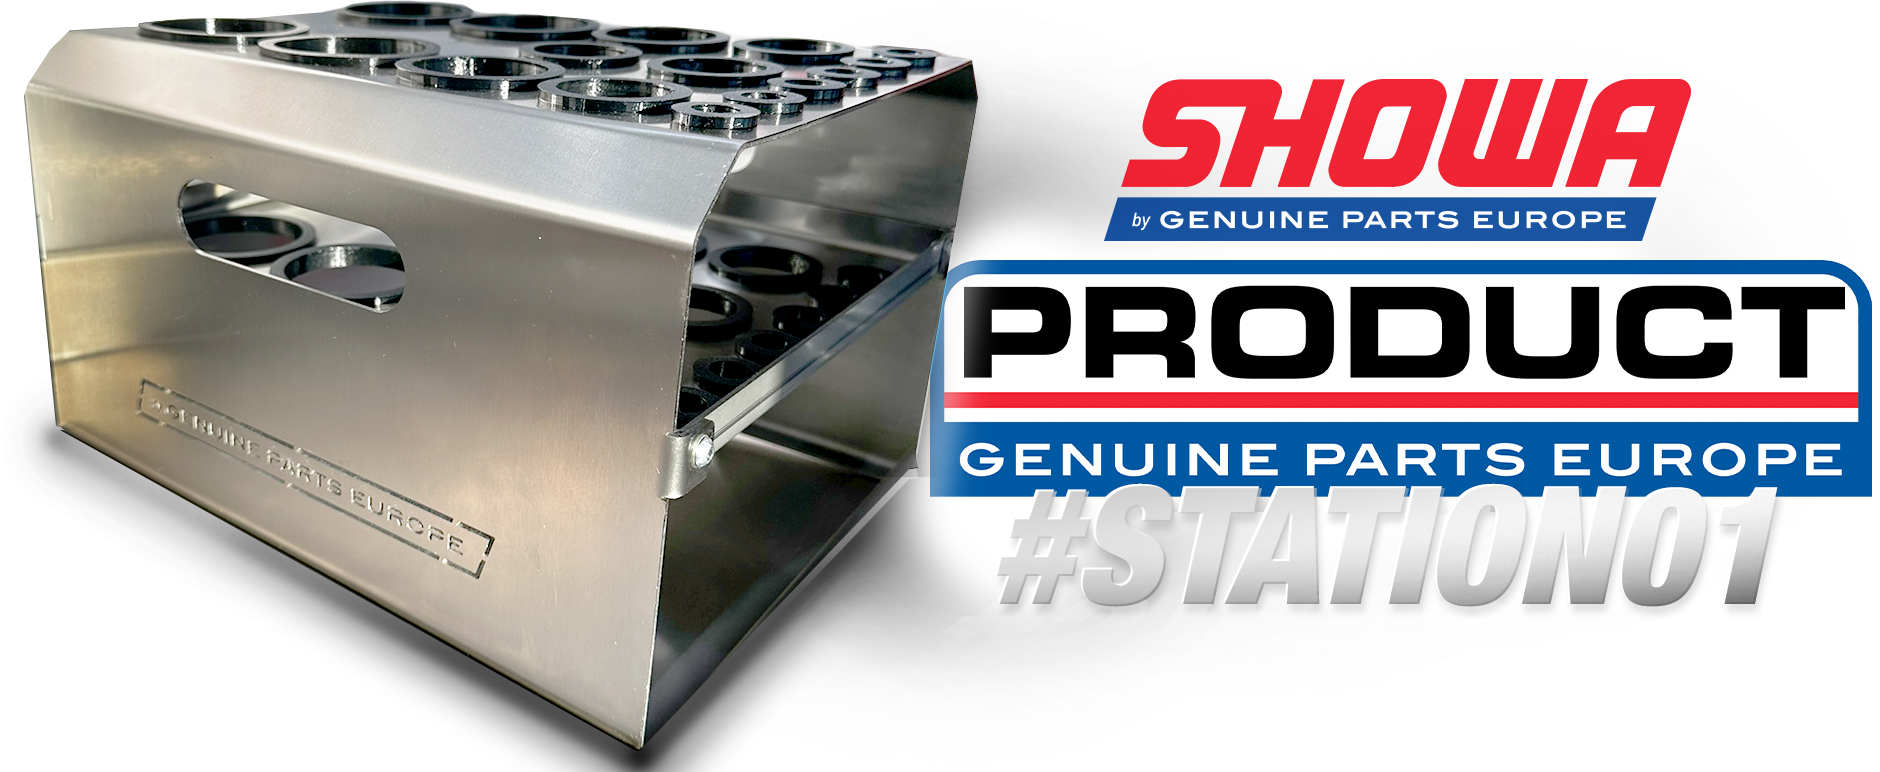 Showa Official Website - Showa by Genuine Parts Europe - Spain